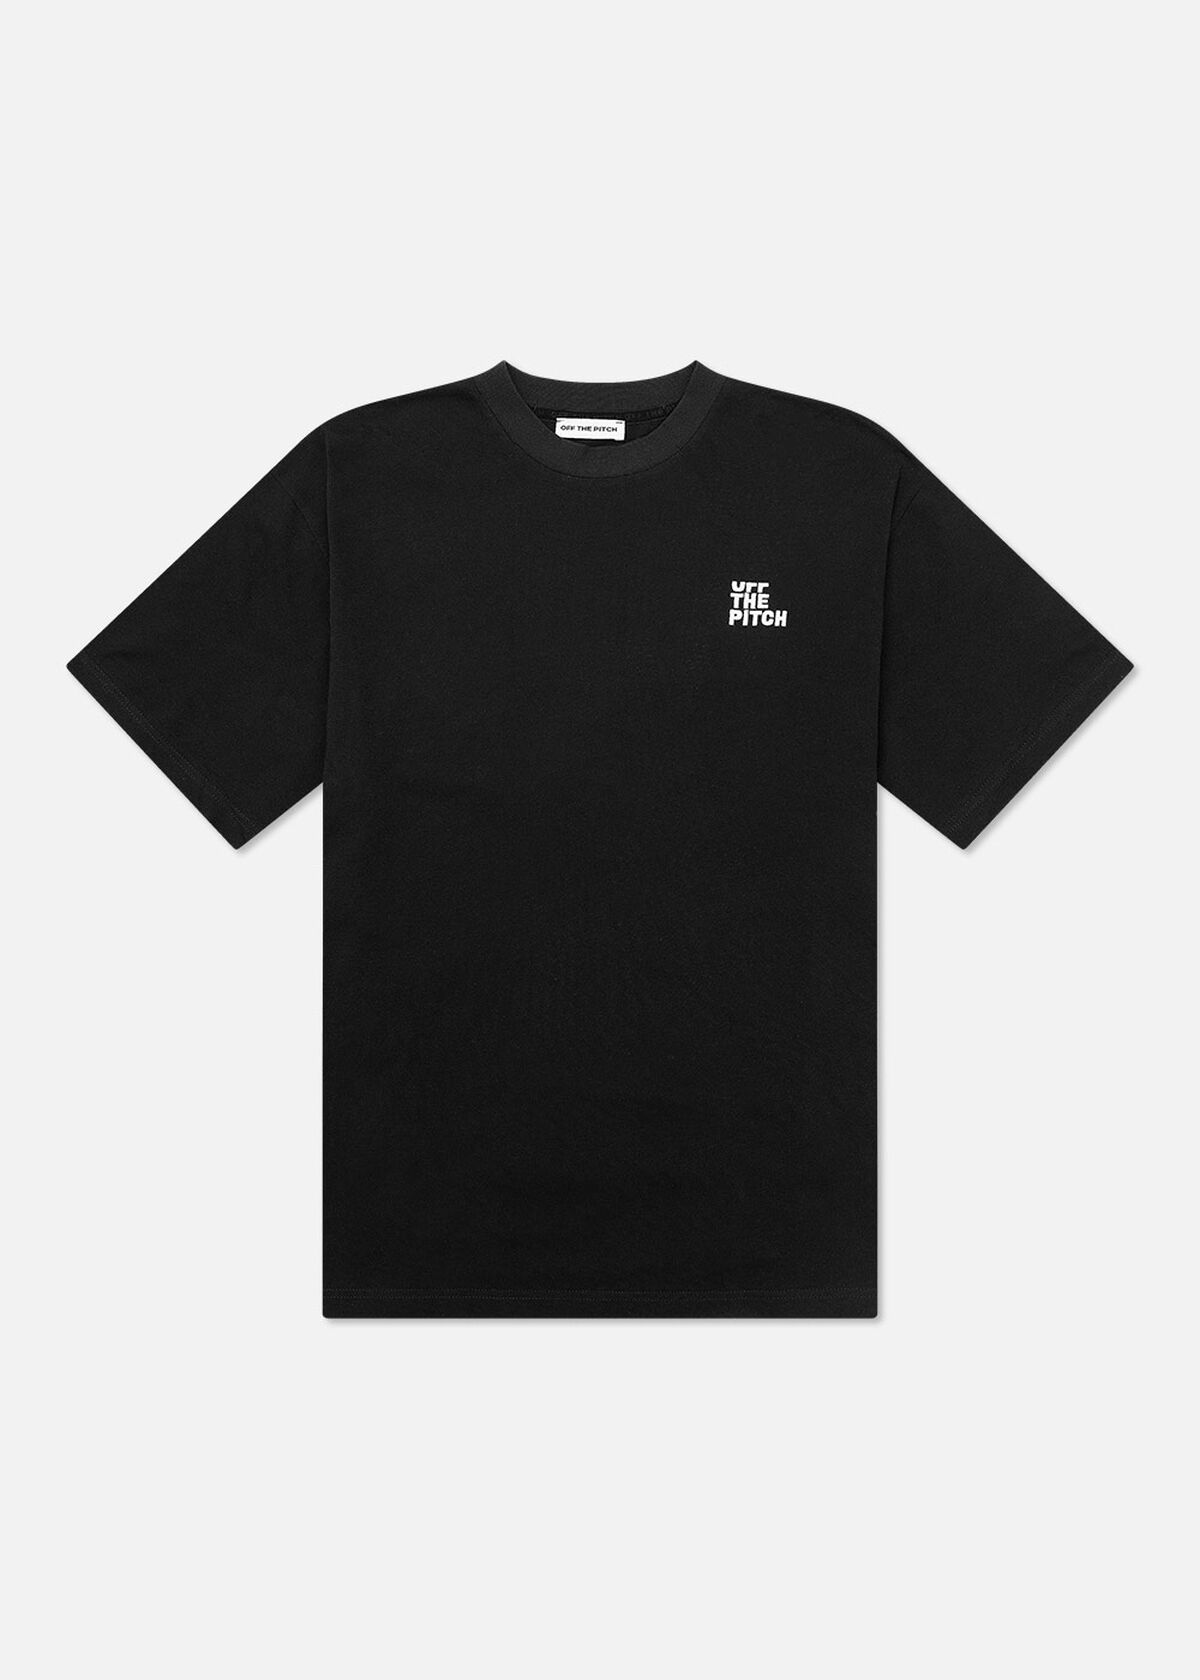 Loose Fit Pitch Tee - 100% Cotton, Black, hi-res